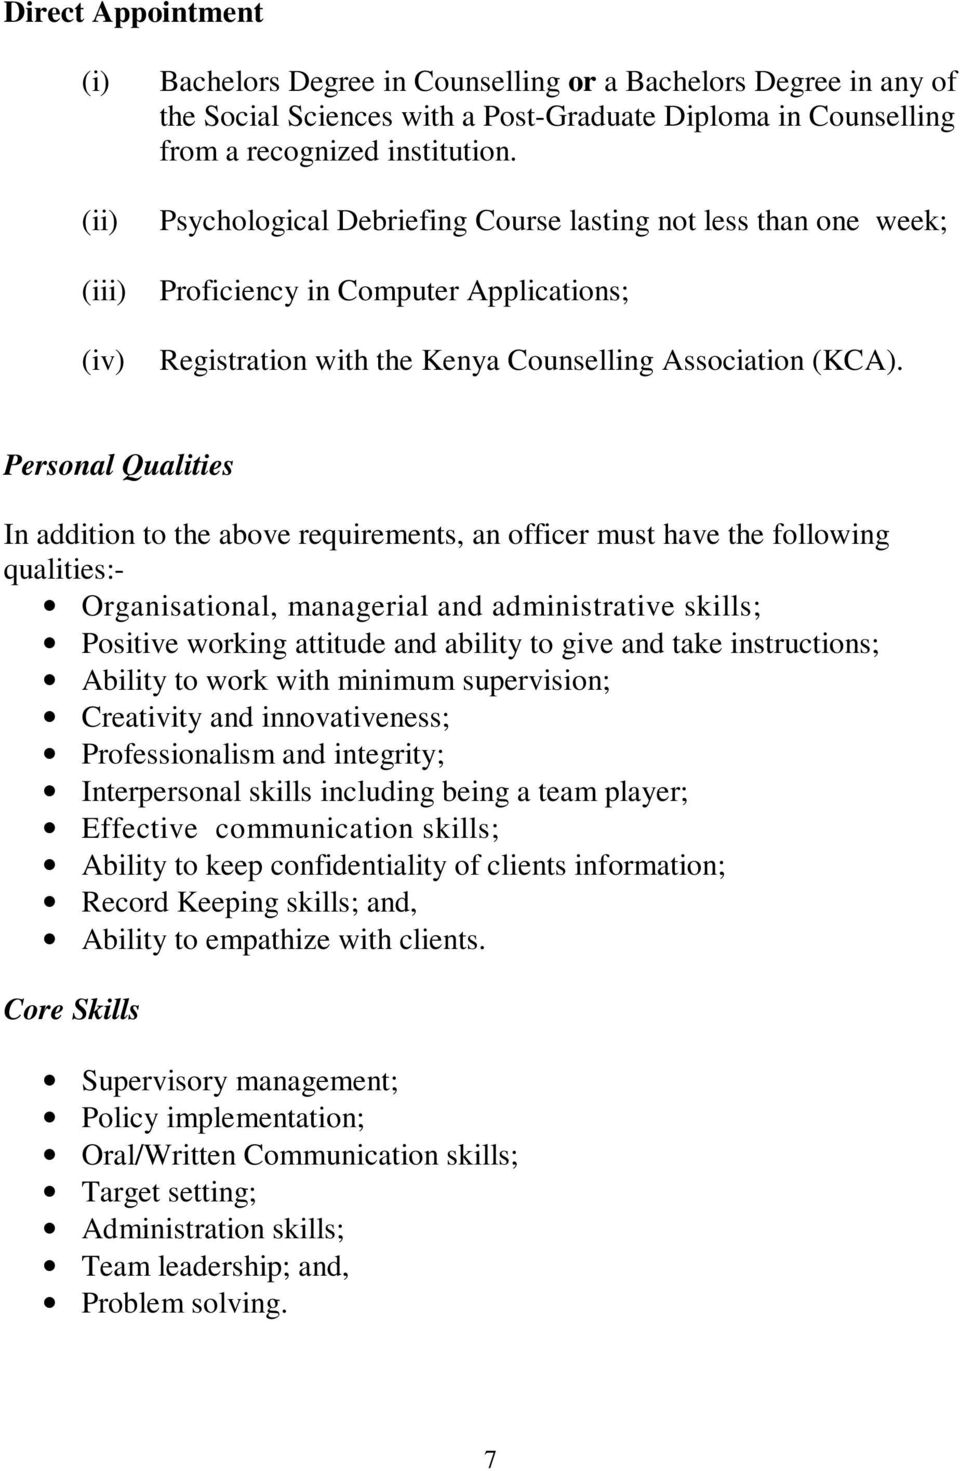 Personal Qualities In addition to the above requirements, an officer must have the following qualities:- Organisational, managerial and administrative skills; Positive working attitude and ability to